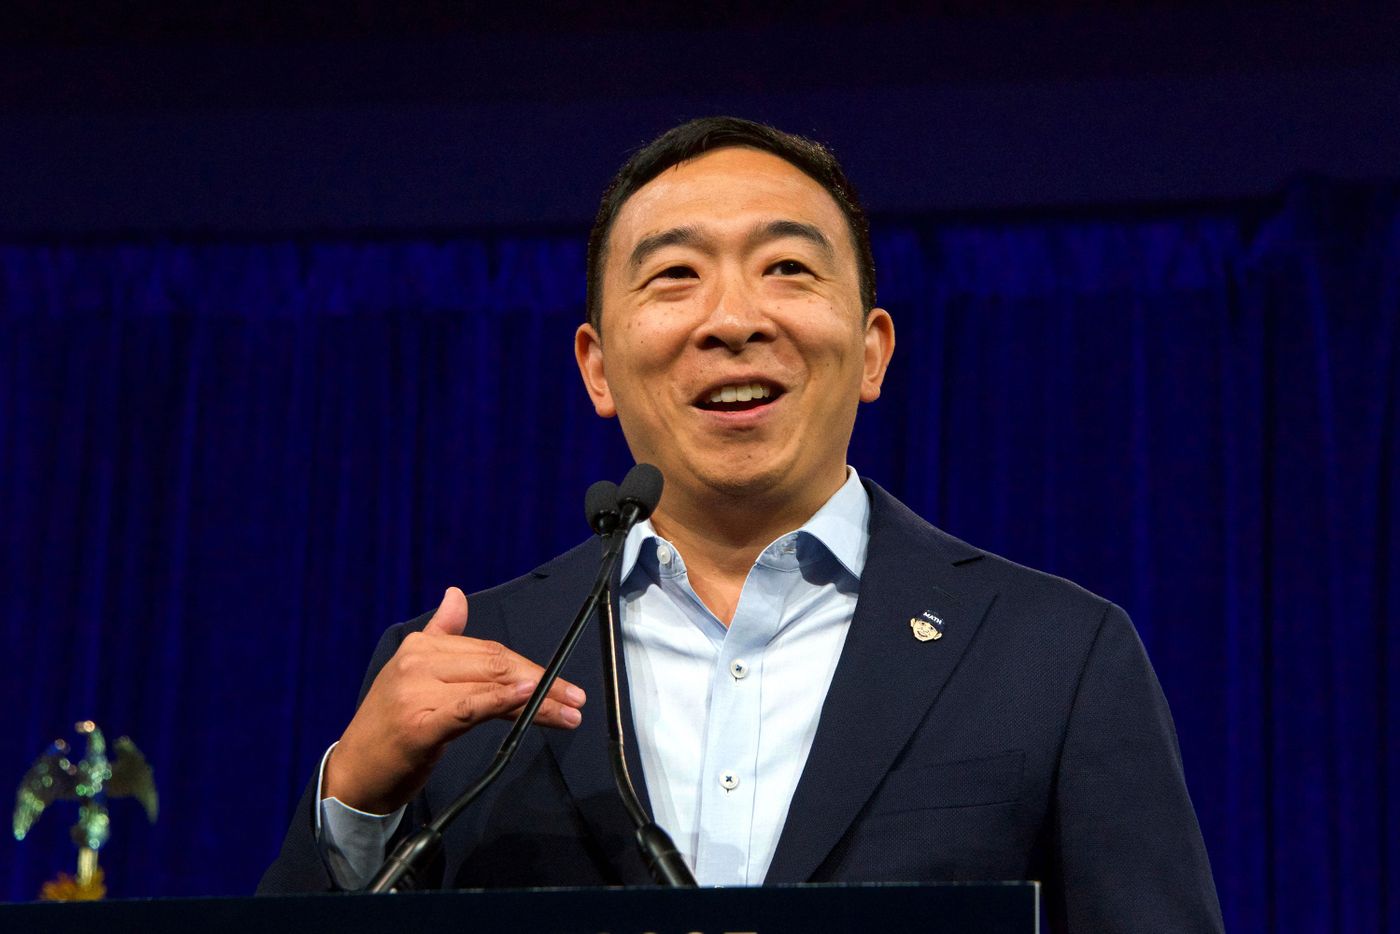 Andrew Yang campaigns in 2019 for president.